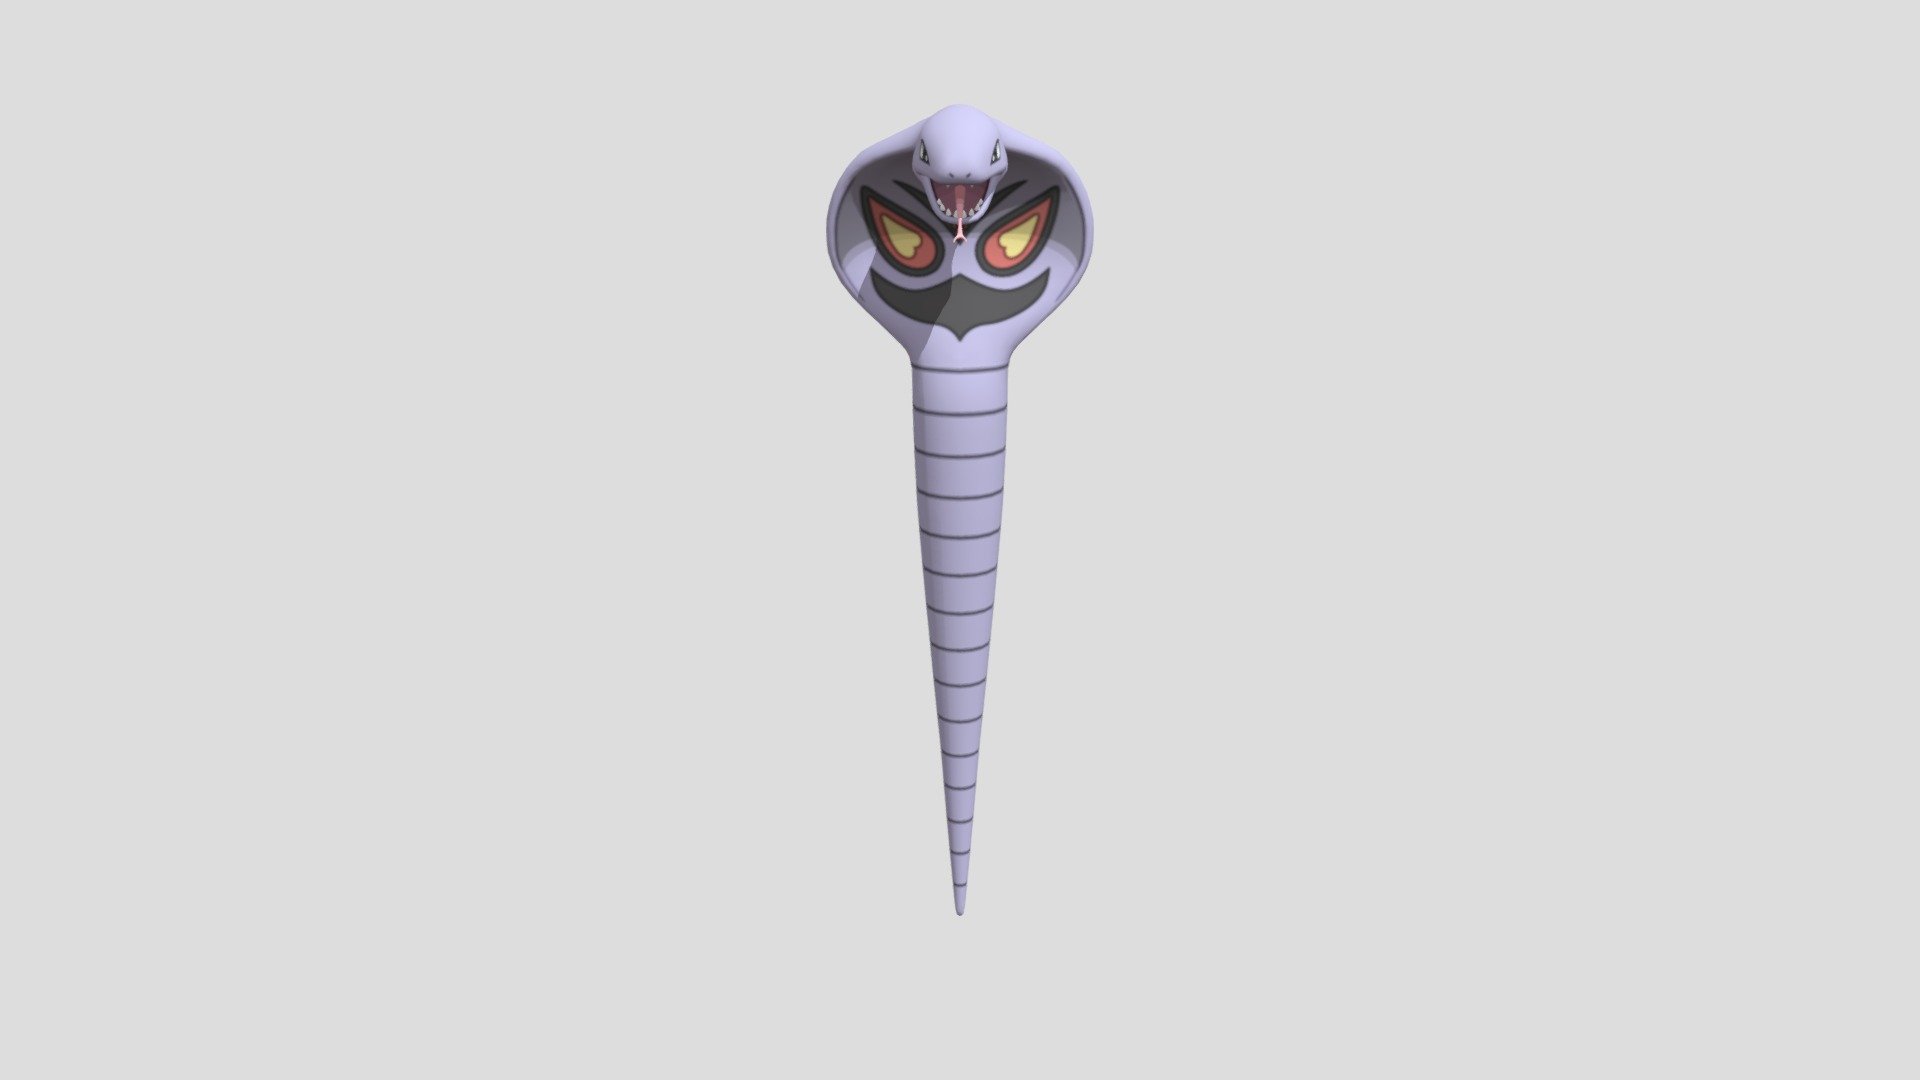 arbok-download-free-3d-model-by-nguyenlouis32-716a171-sketchfab